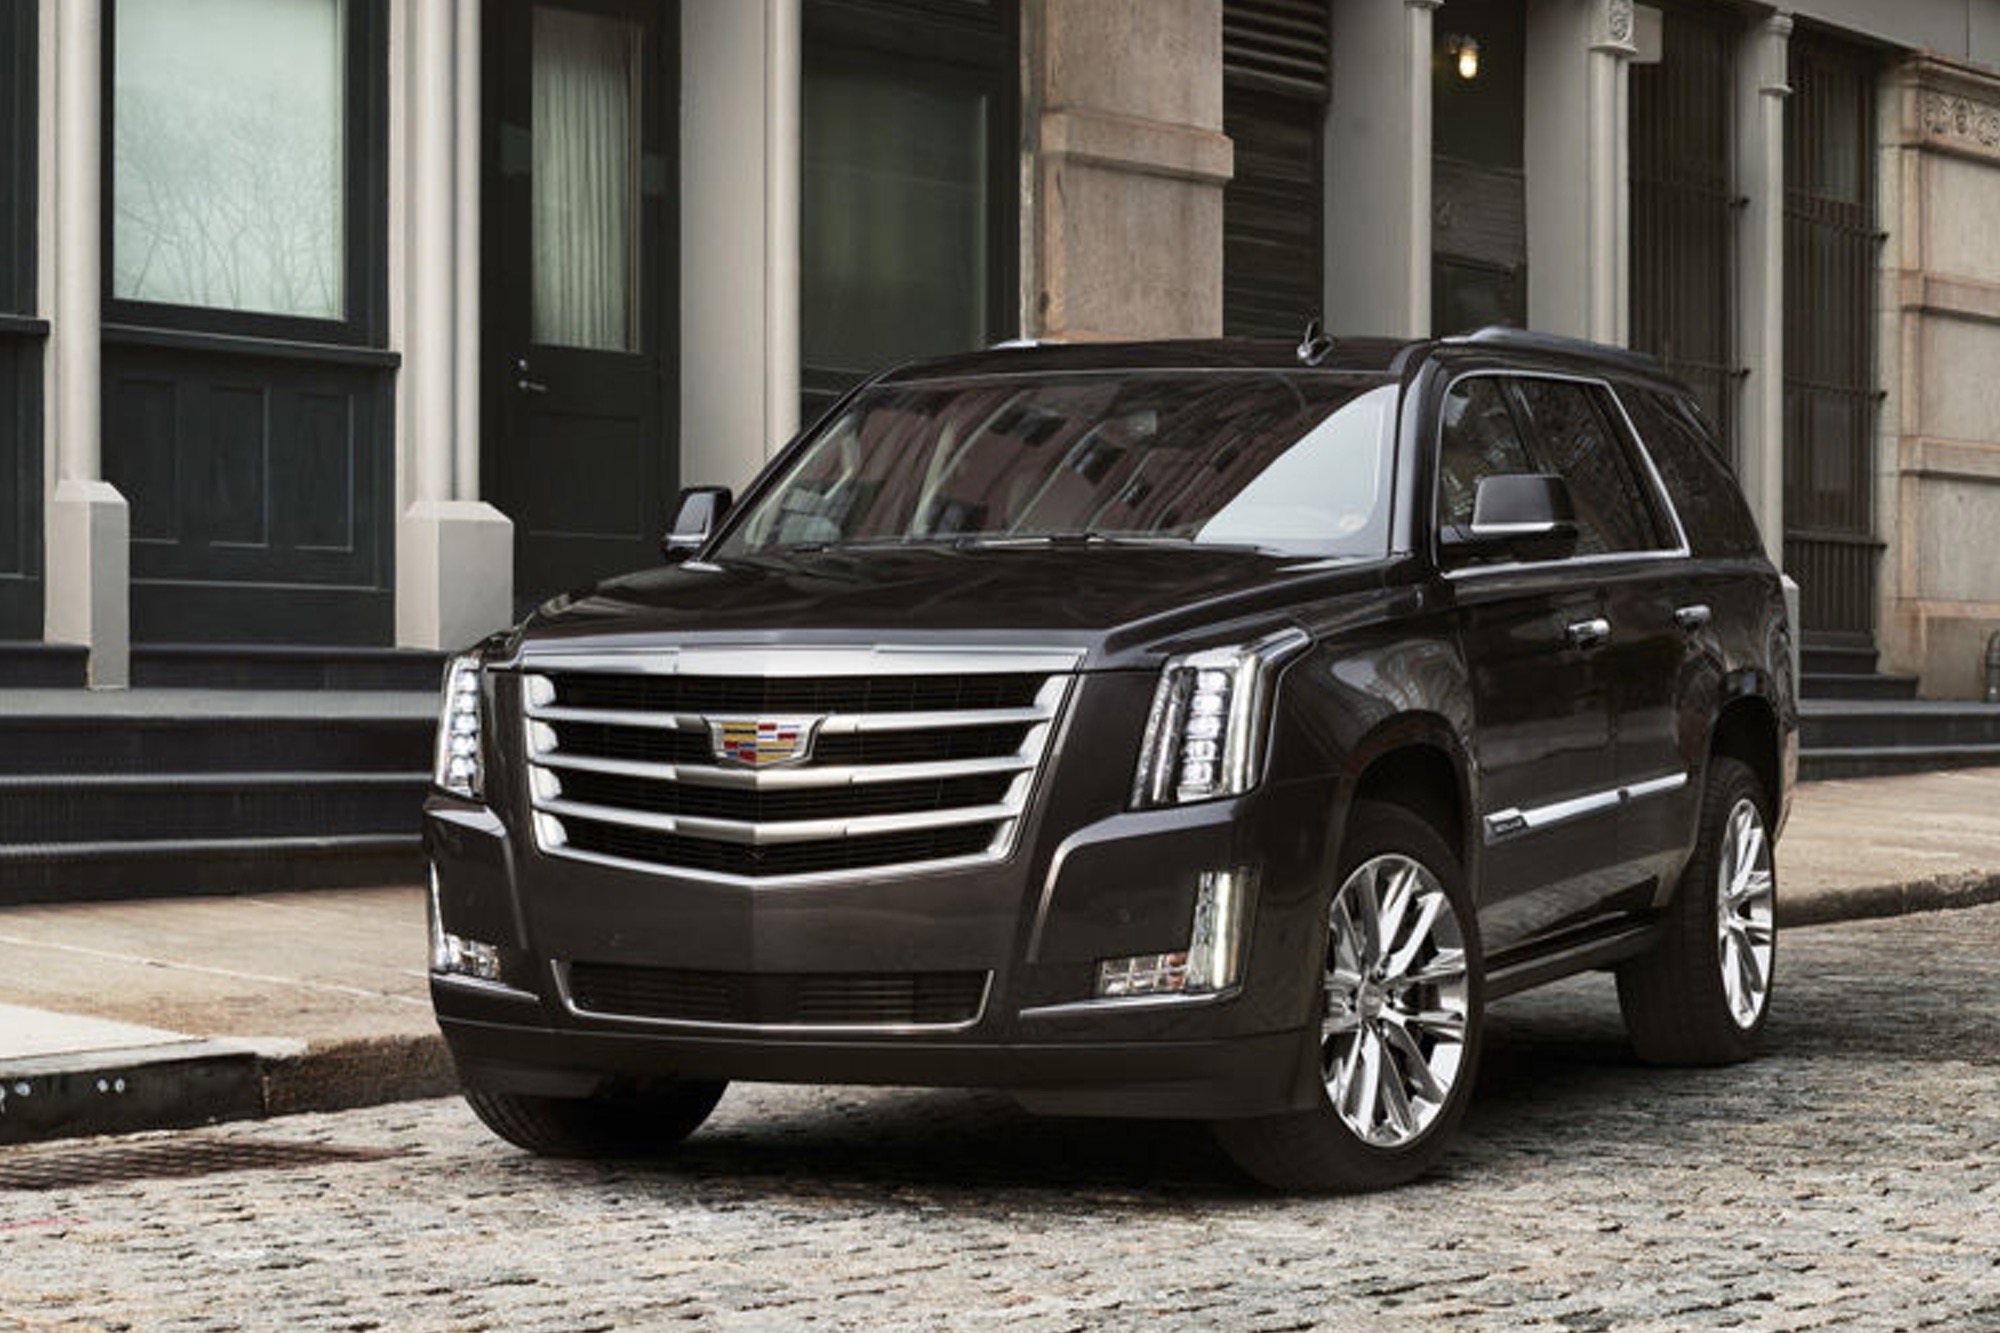 2020 Cadillac Escalade: Here's What's New And Different | GM Authority